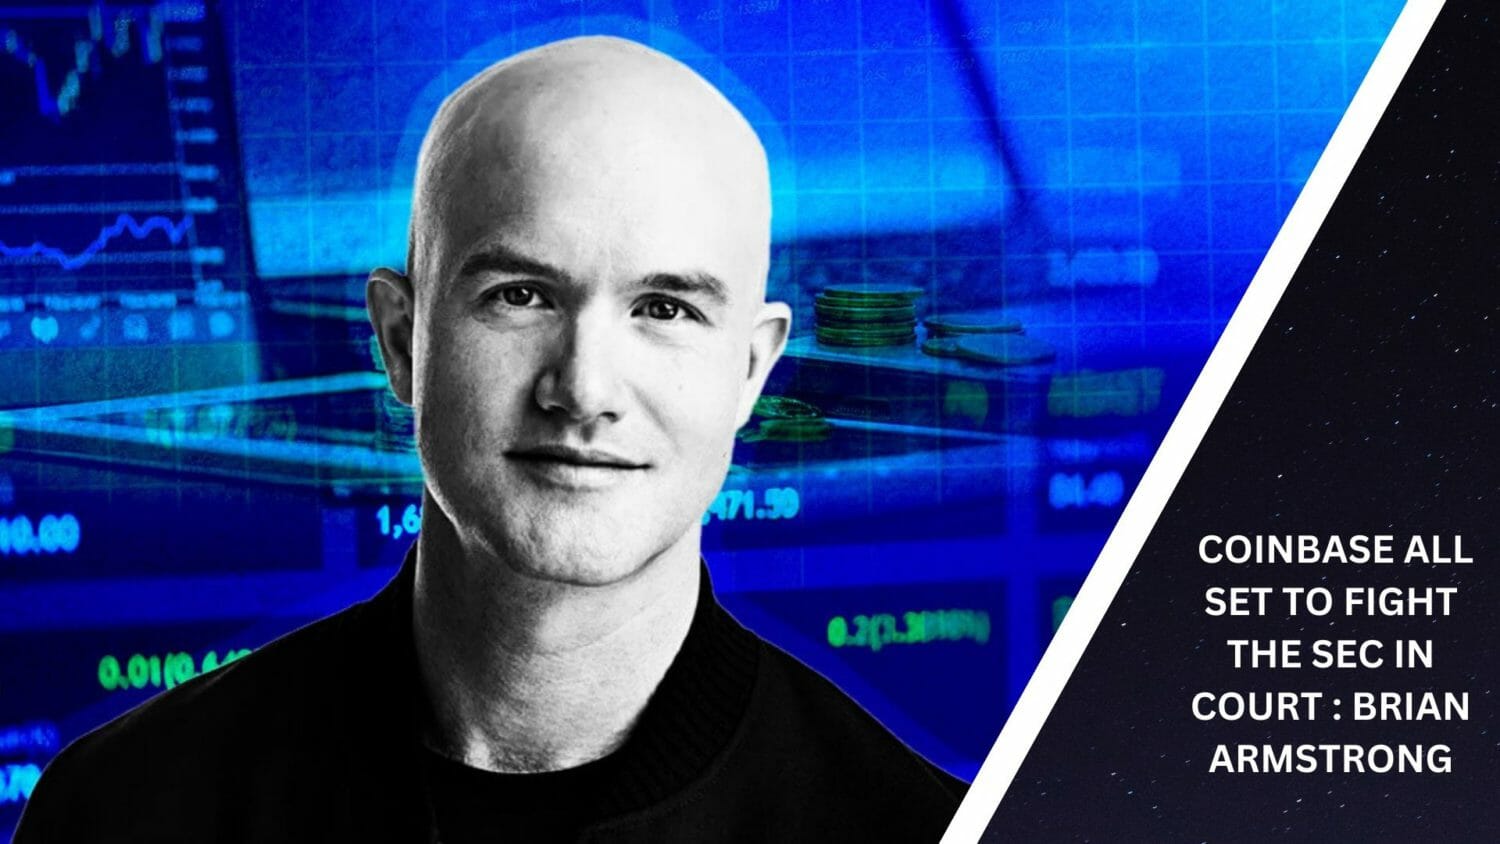 Coinbase All Set To Fight The Sec In Court : Brian Armstrong